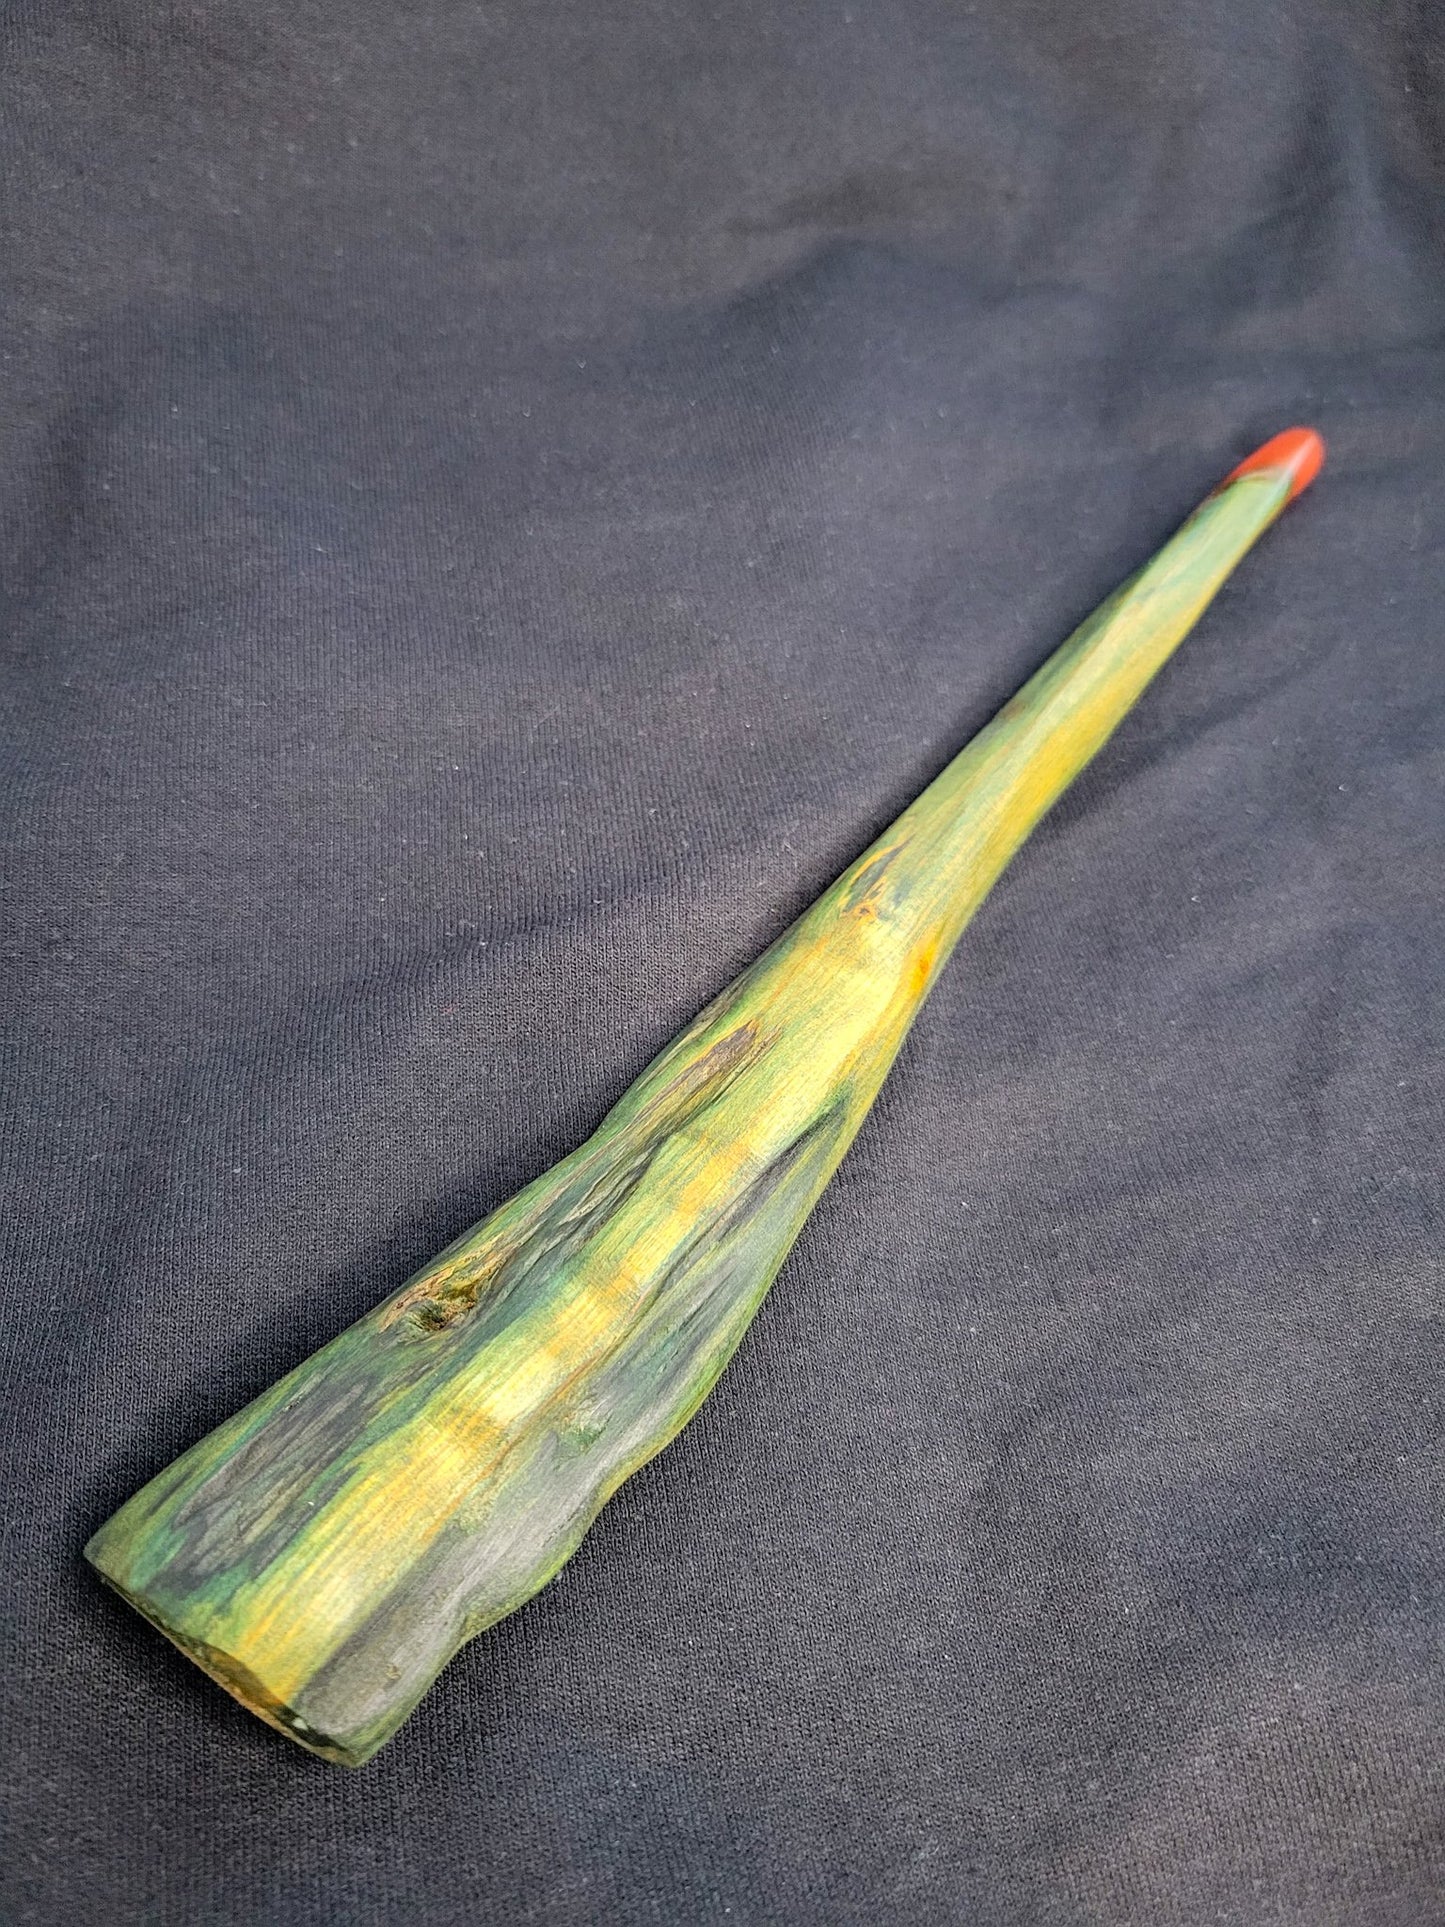 Wand Made From Chlorociboria-Stained Wood, Red Epoxy Tip